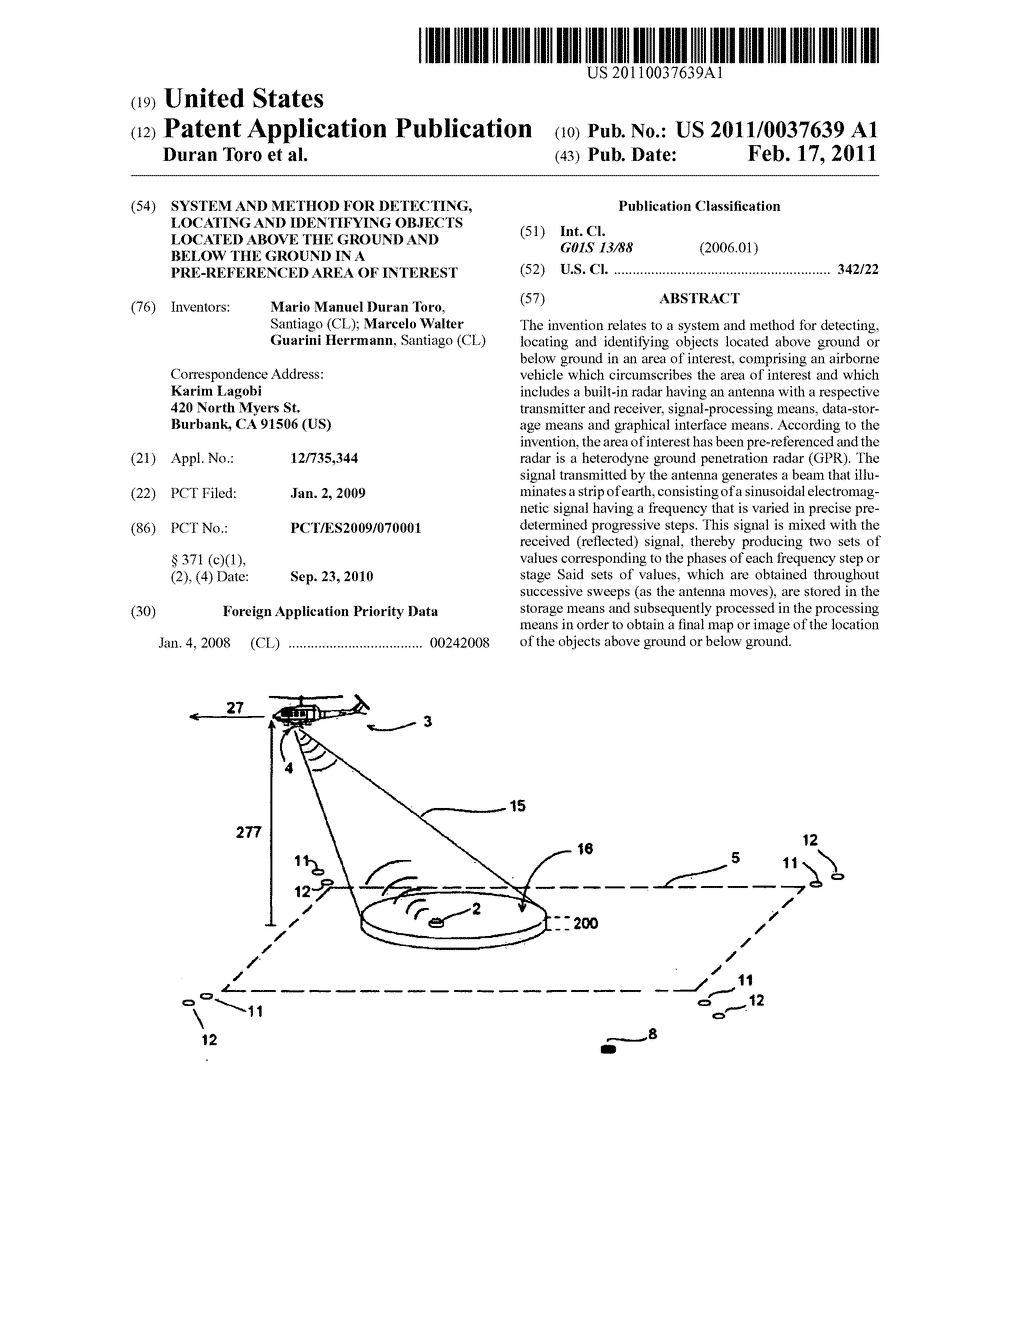 SYSTEM AND METHOD FOR DETECTING, LOCATING AND IDENTIFYING OBJECTS LOCATED ABOVE THE GROUND AND BELOW THE GROUND IN A PRE-REFERENCED AREA OF INTEREST - diagram, schematic, and image 01